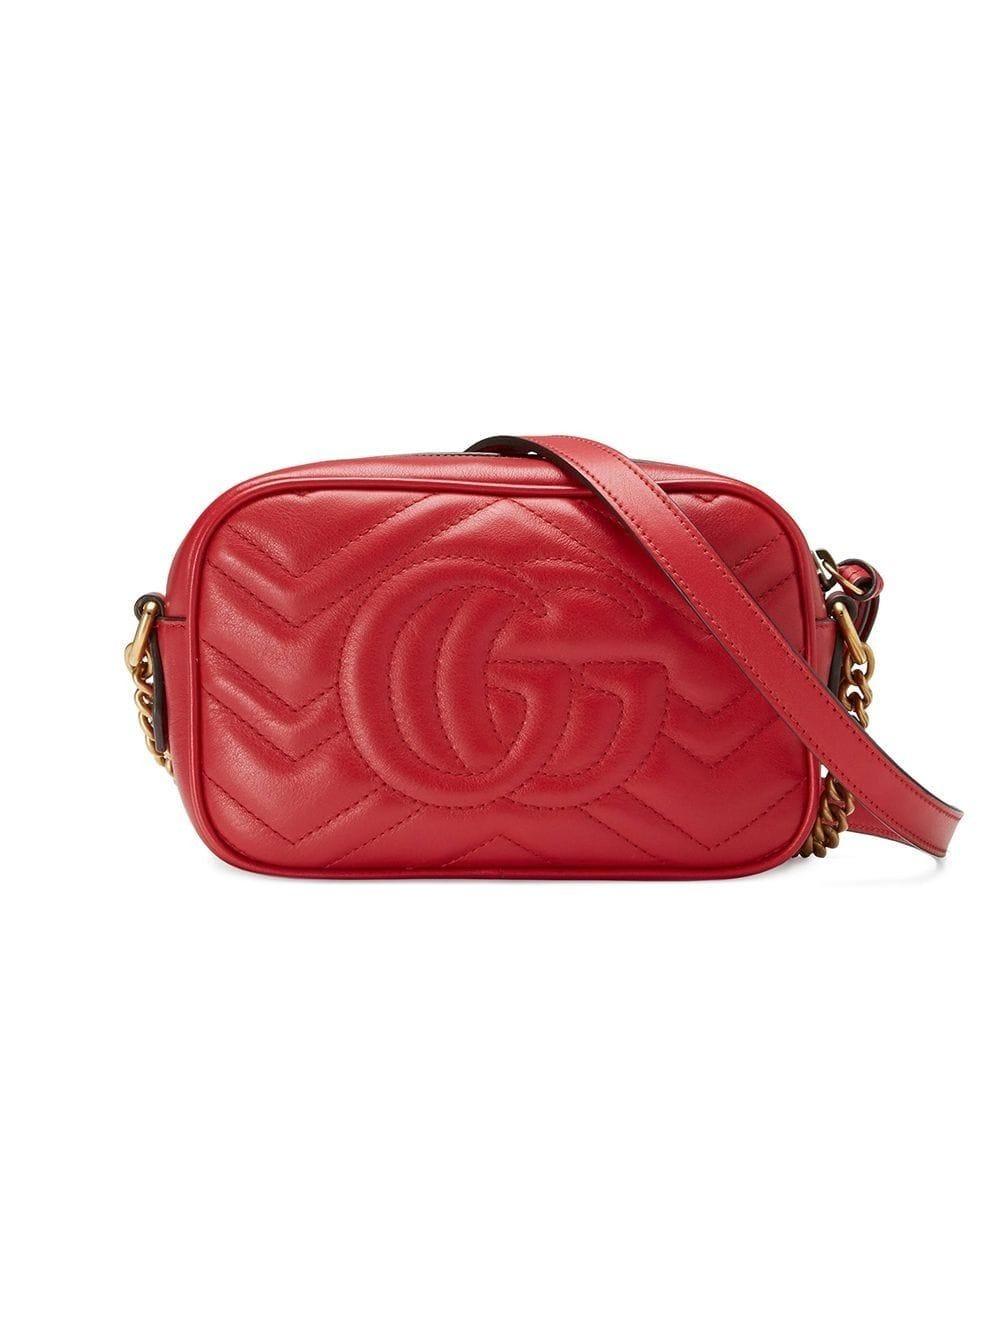 red gucci small bag